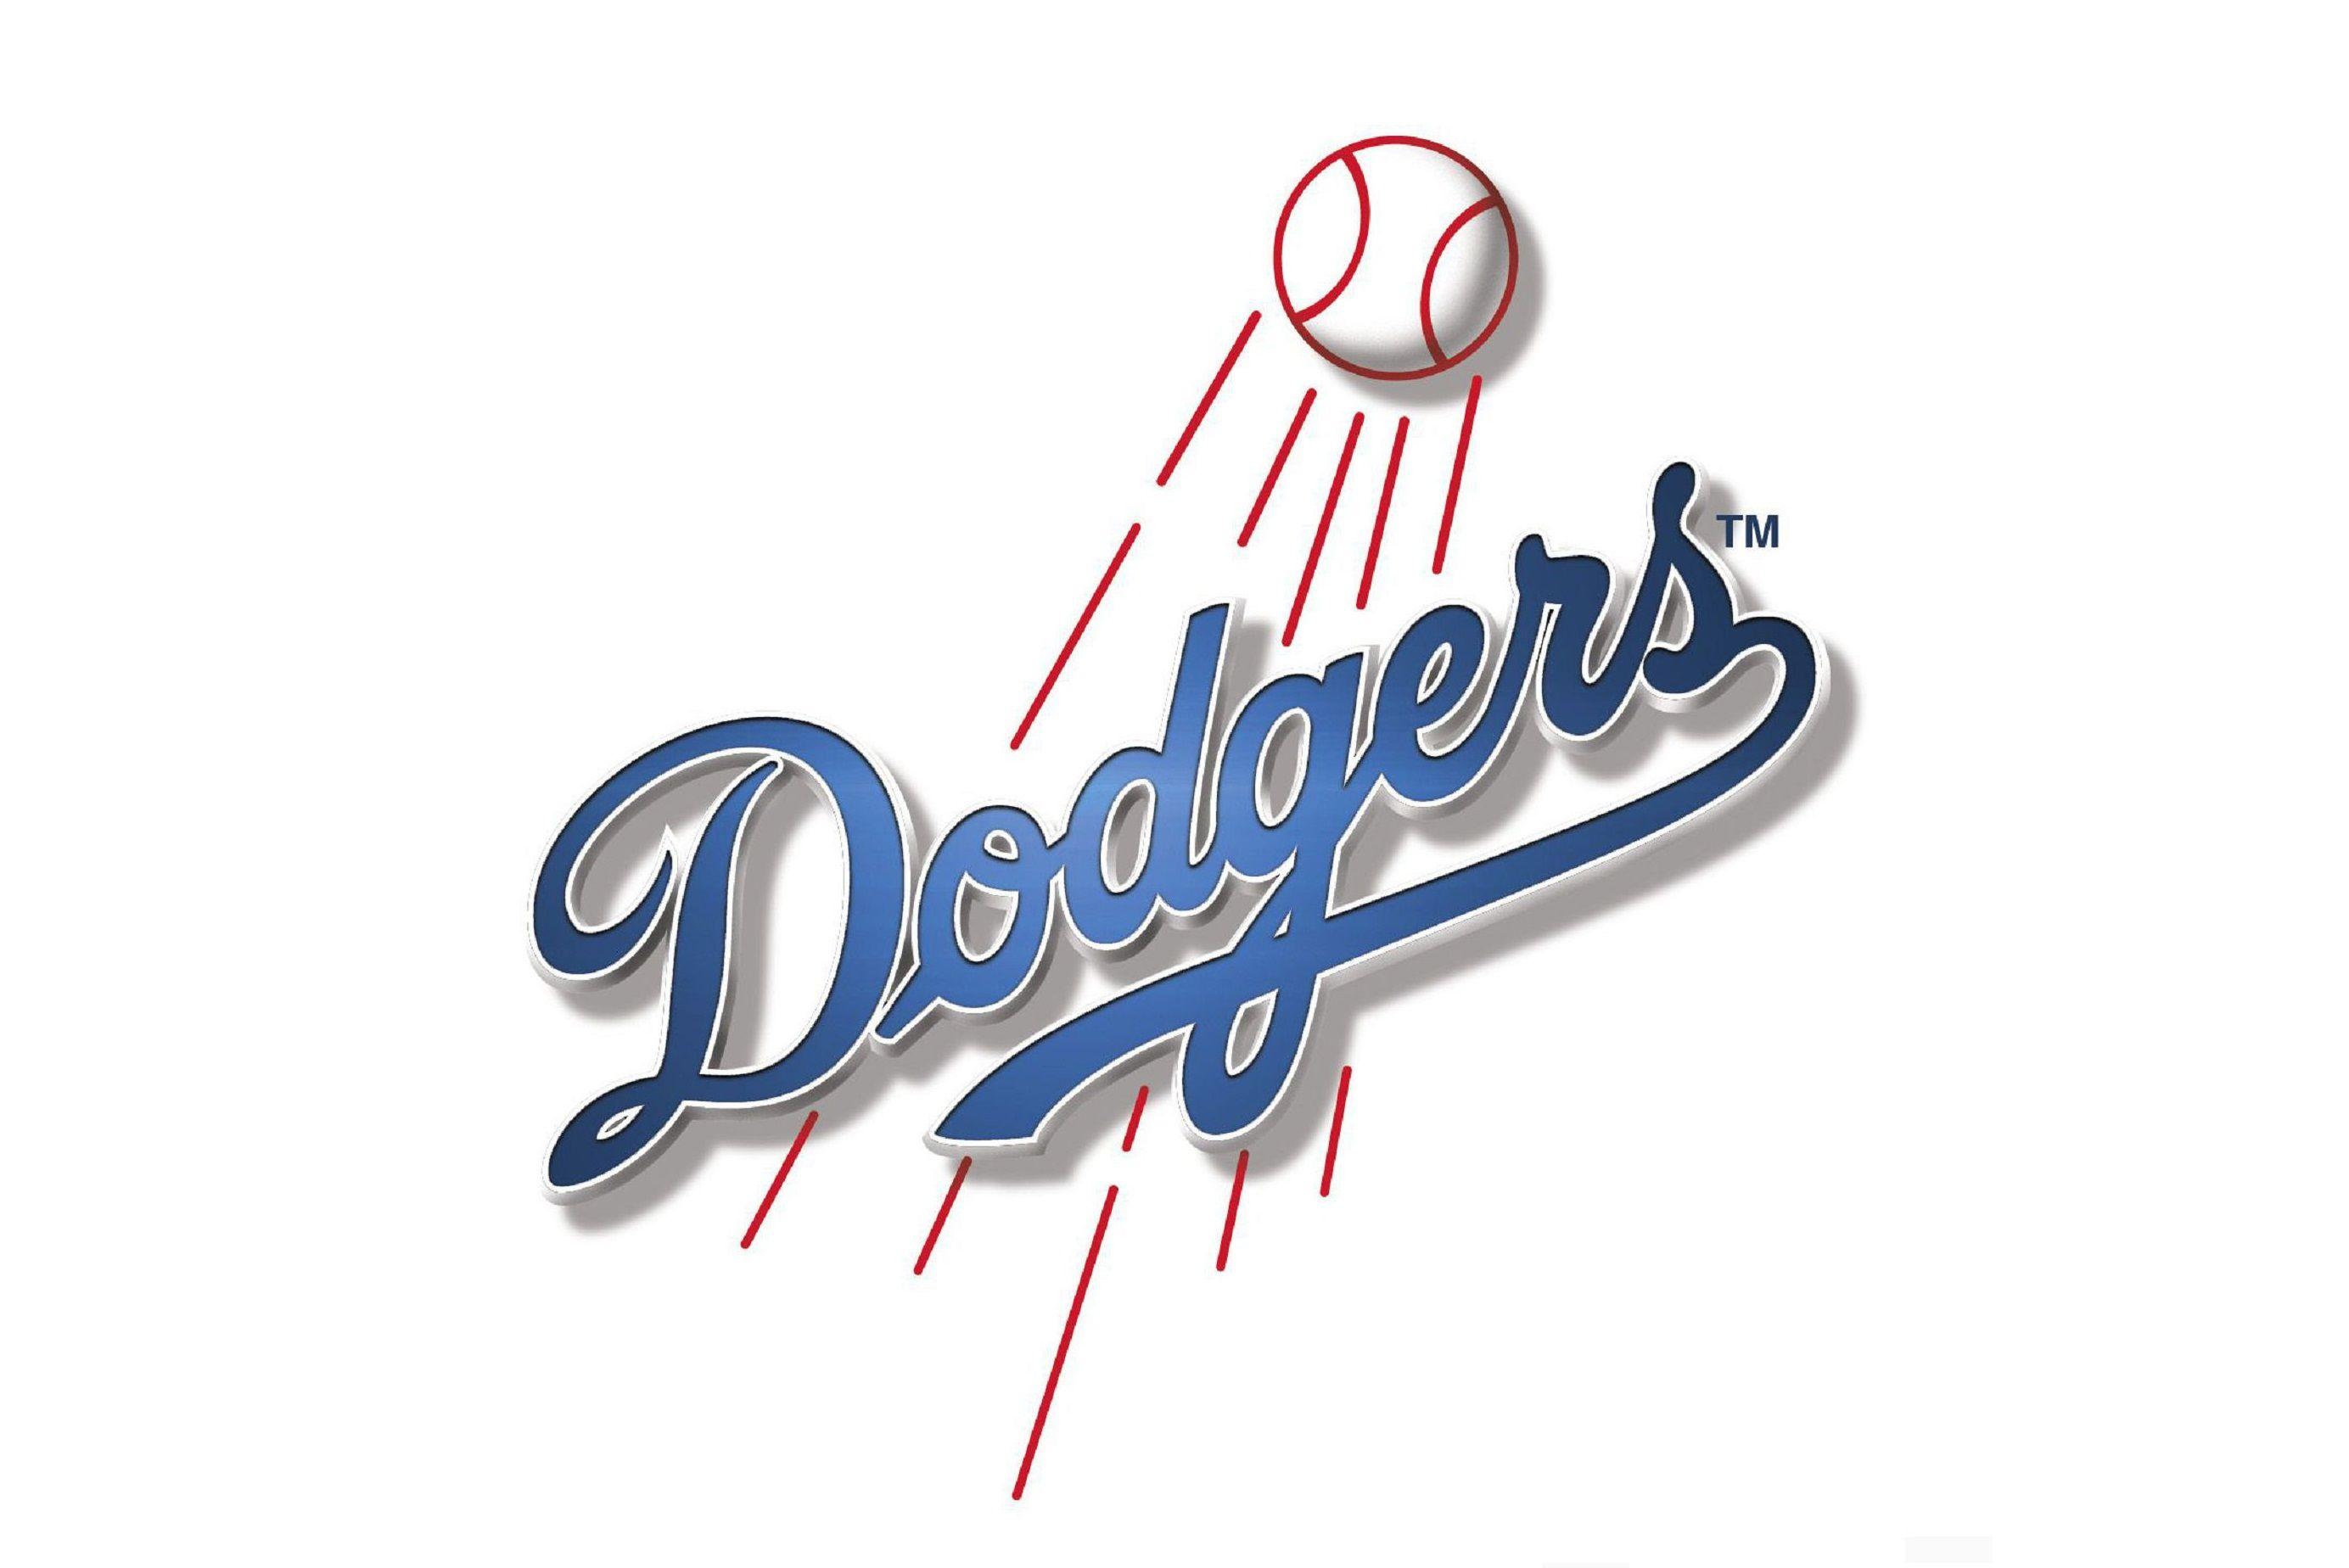 Los Angeles Dodgers Wallpaper Image Photo Picture